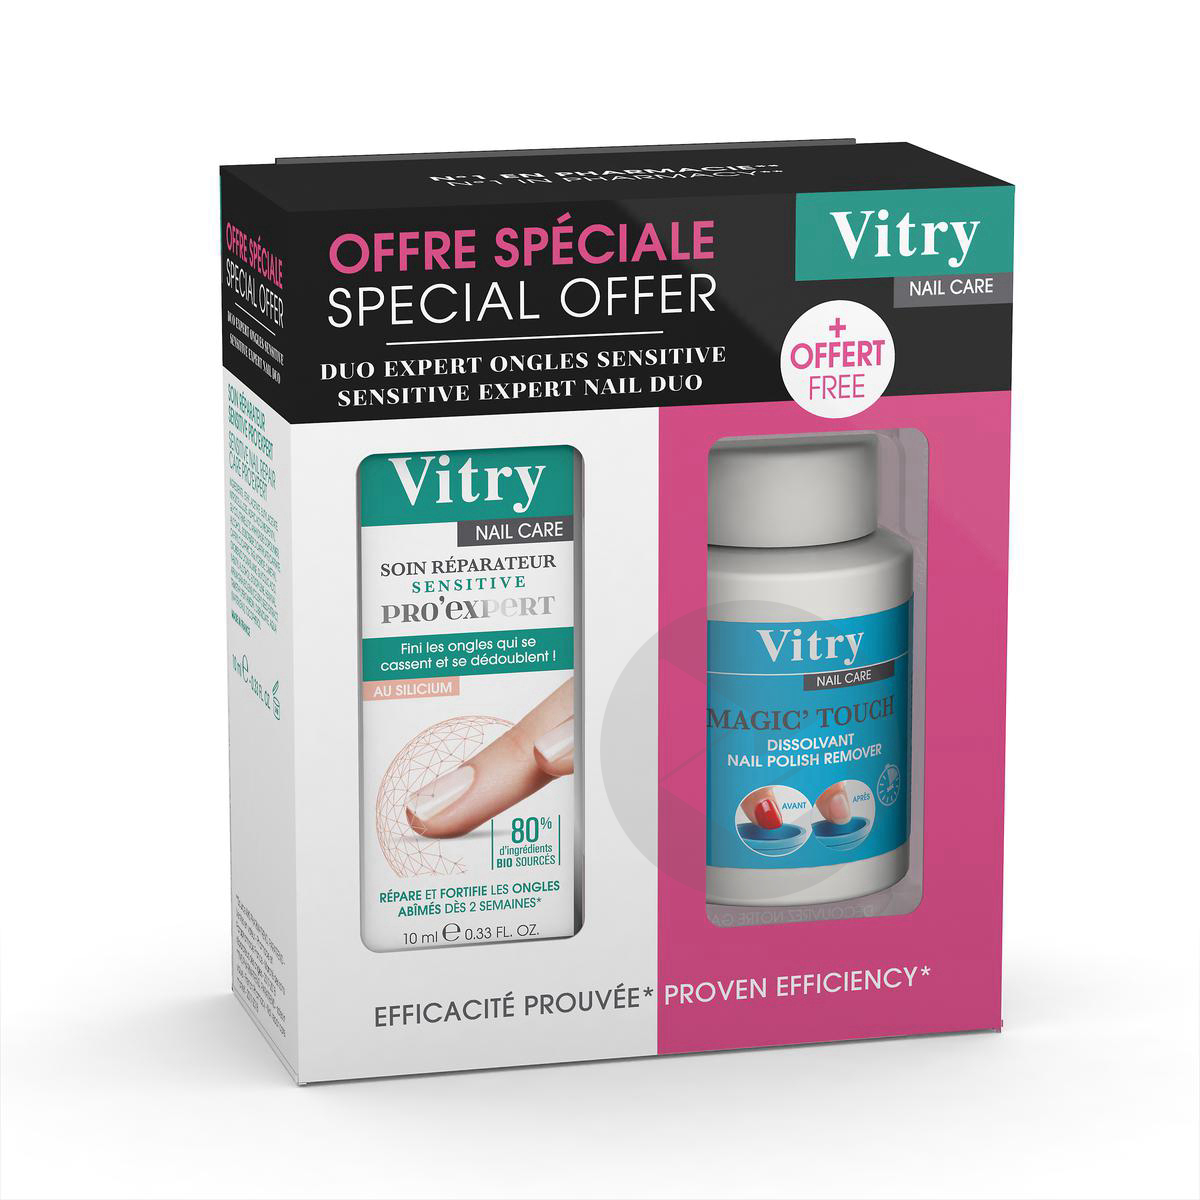 Vitry Duo Soin Ongles Sensitive Pro Exp + Magictouch Offert